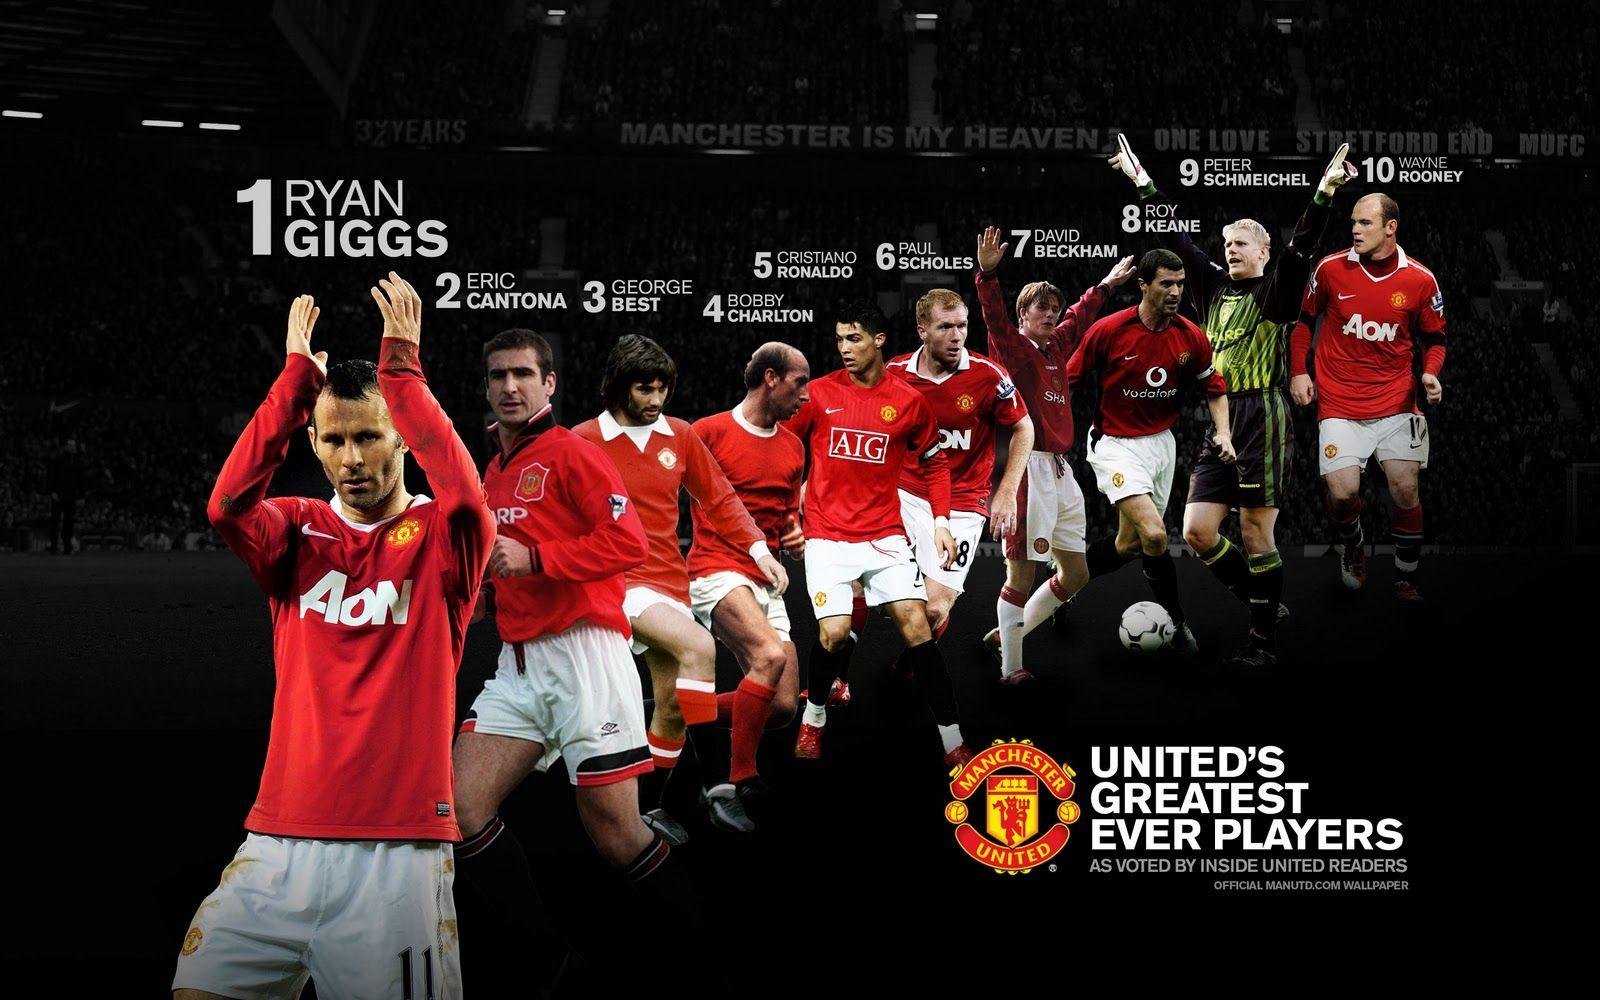 Many missing of course but not bad. Manchester united wallpaper, Manchester united players, Manchester united team